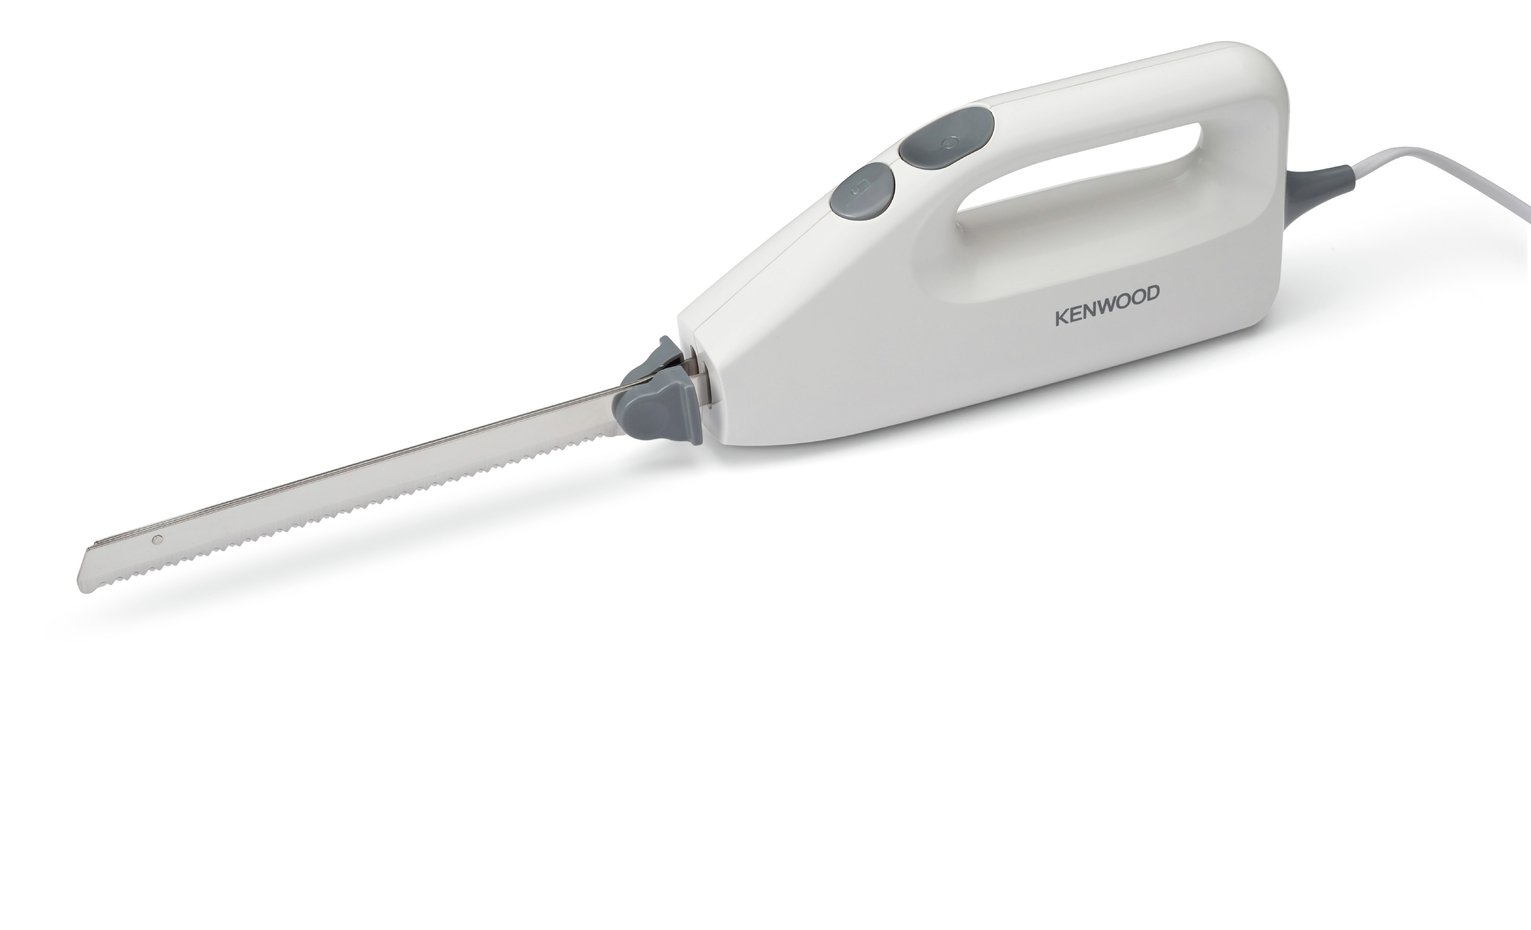 Kenwood  KN650A Electric Knife - White